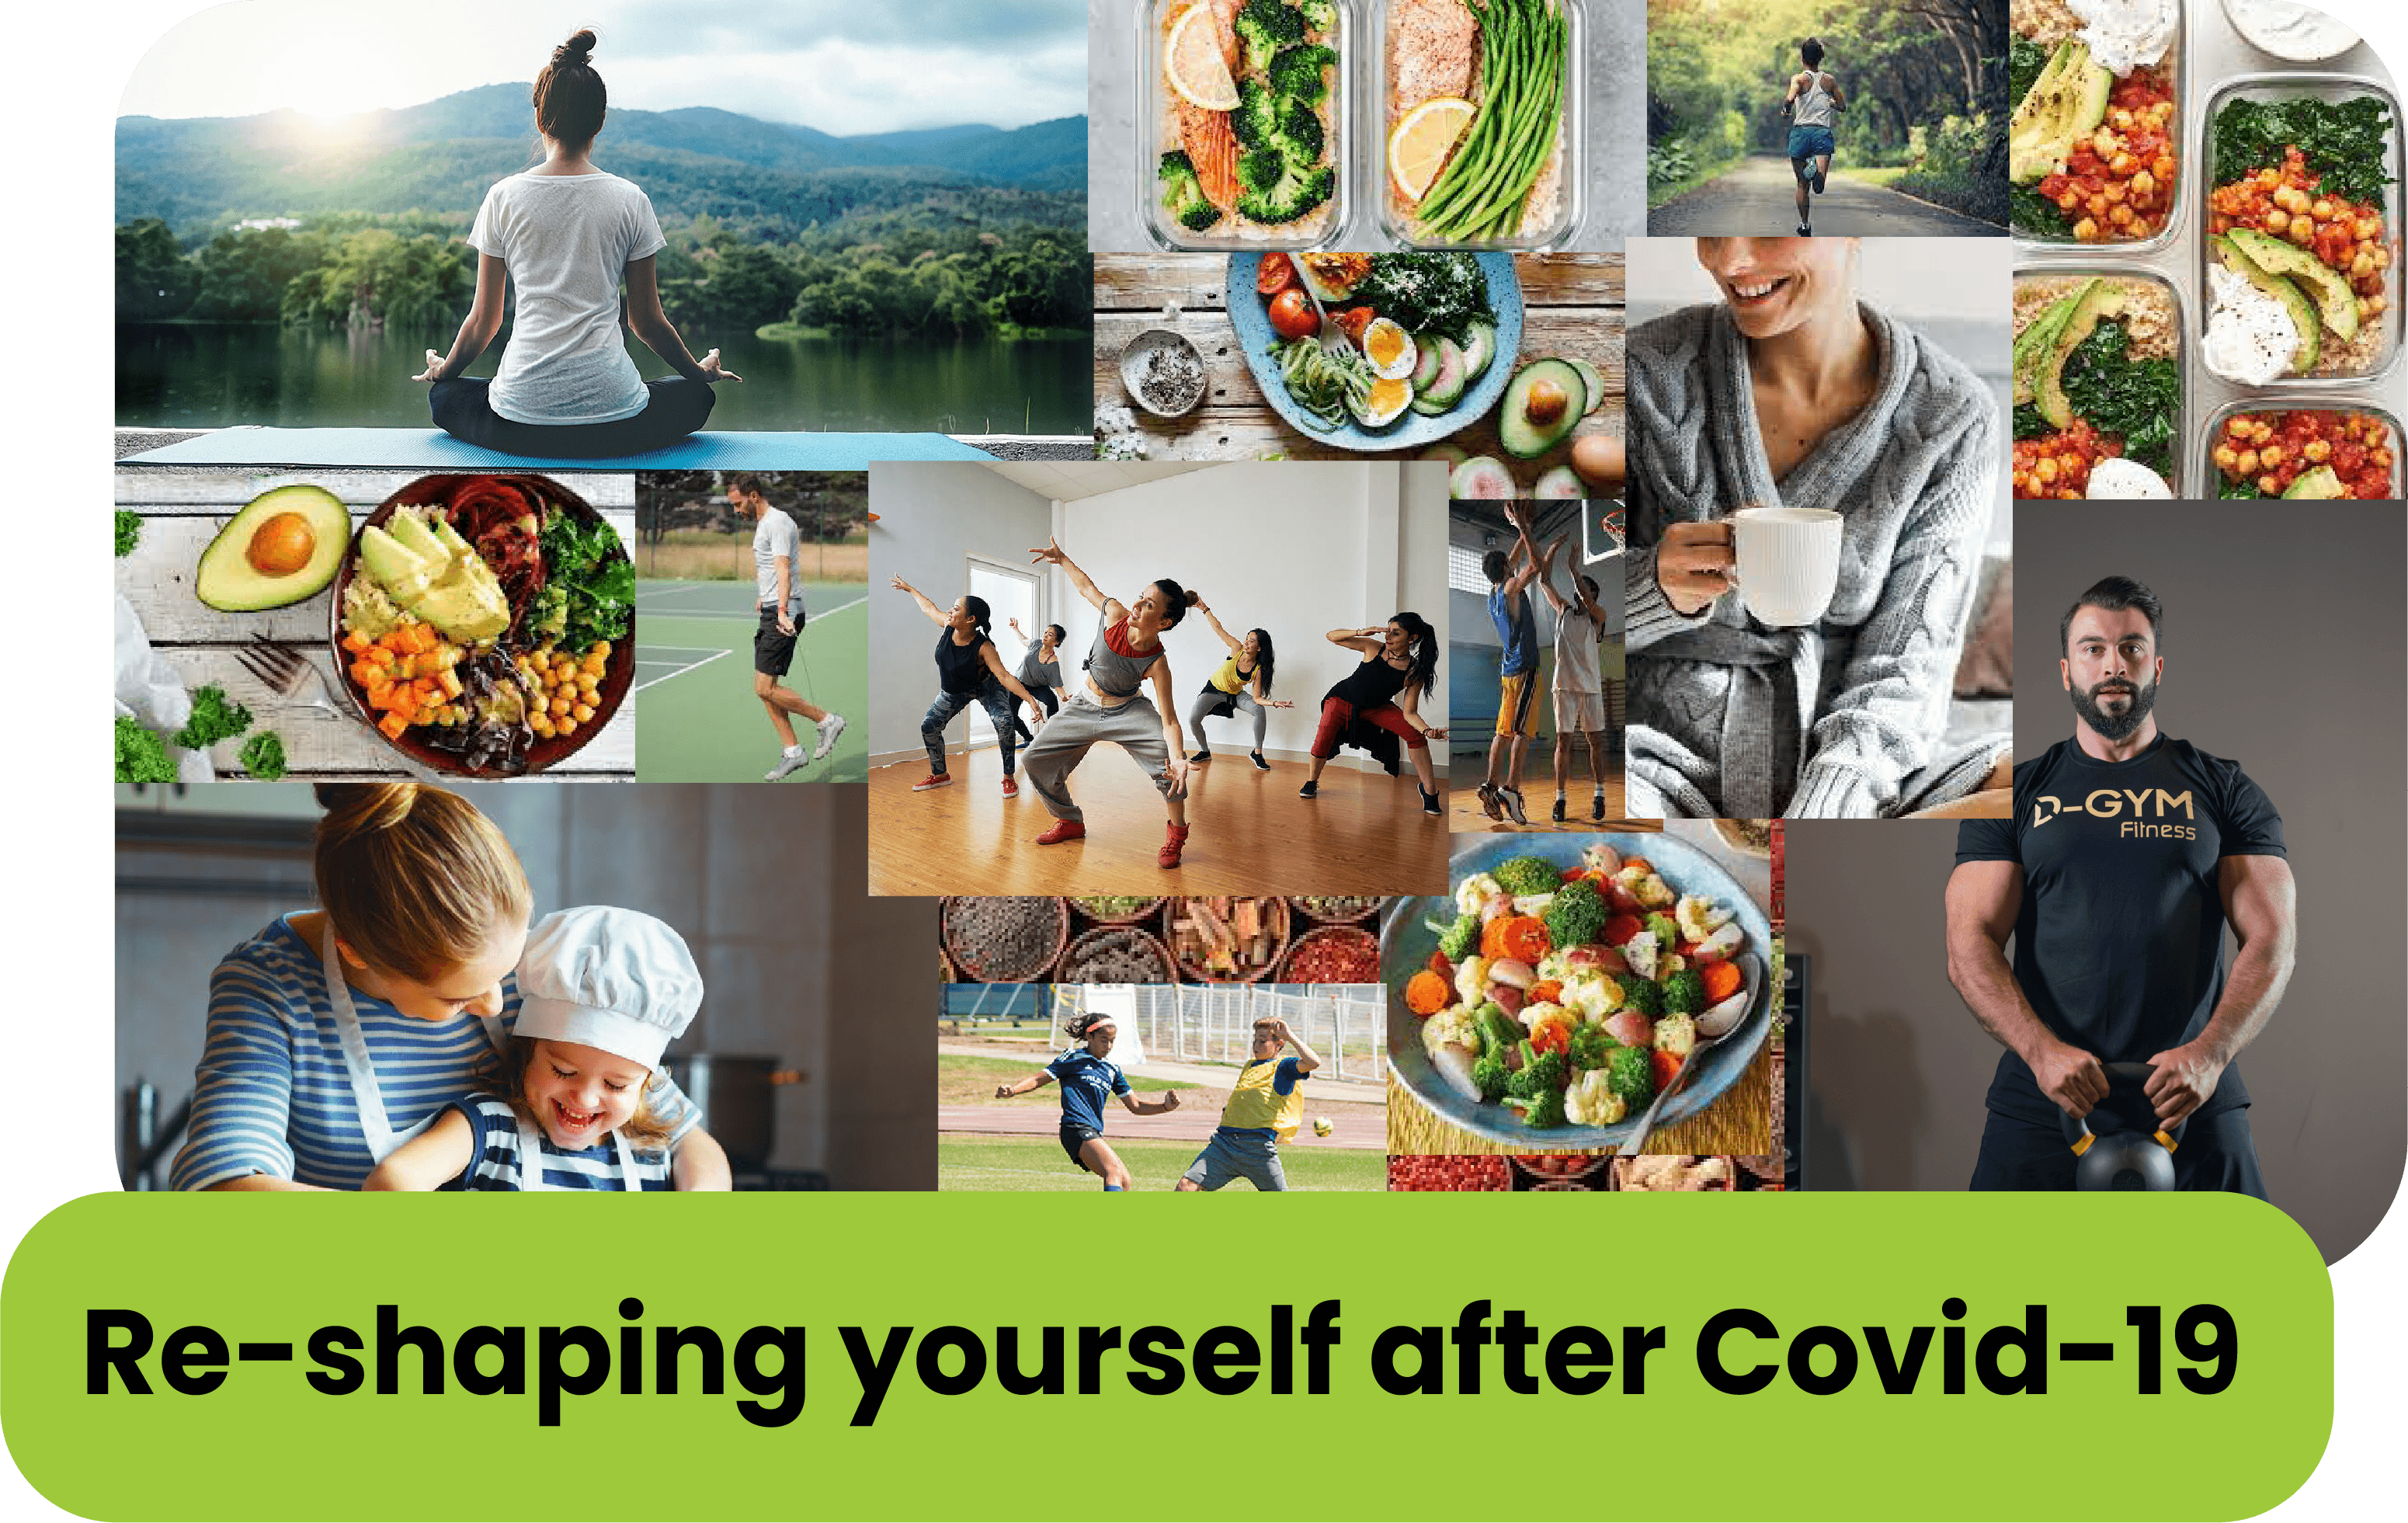 Re-shaping yourself after Covid-19